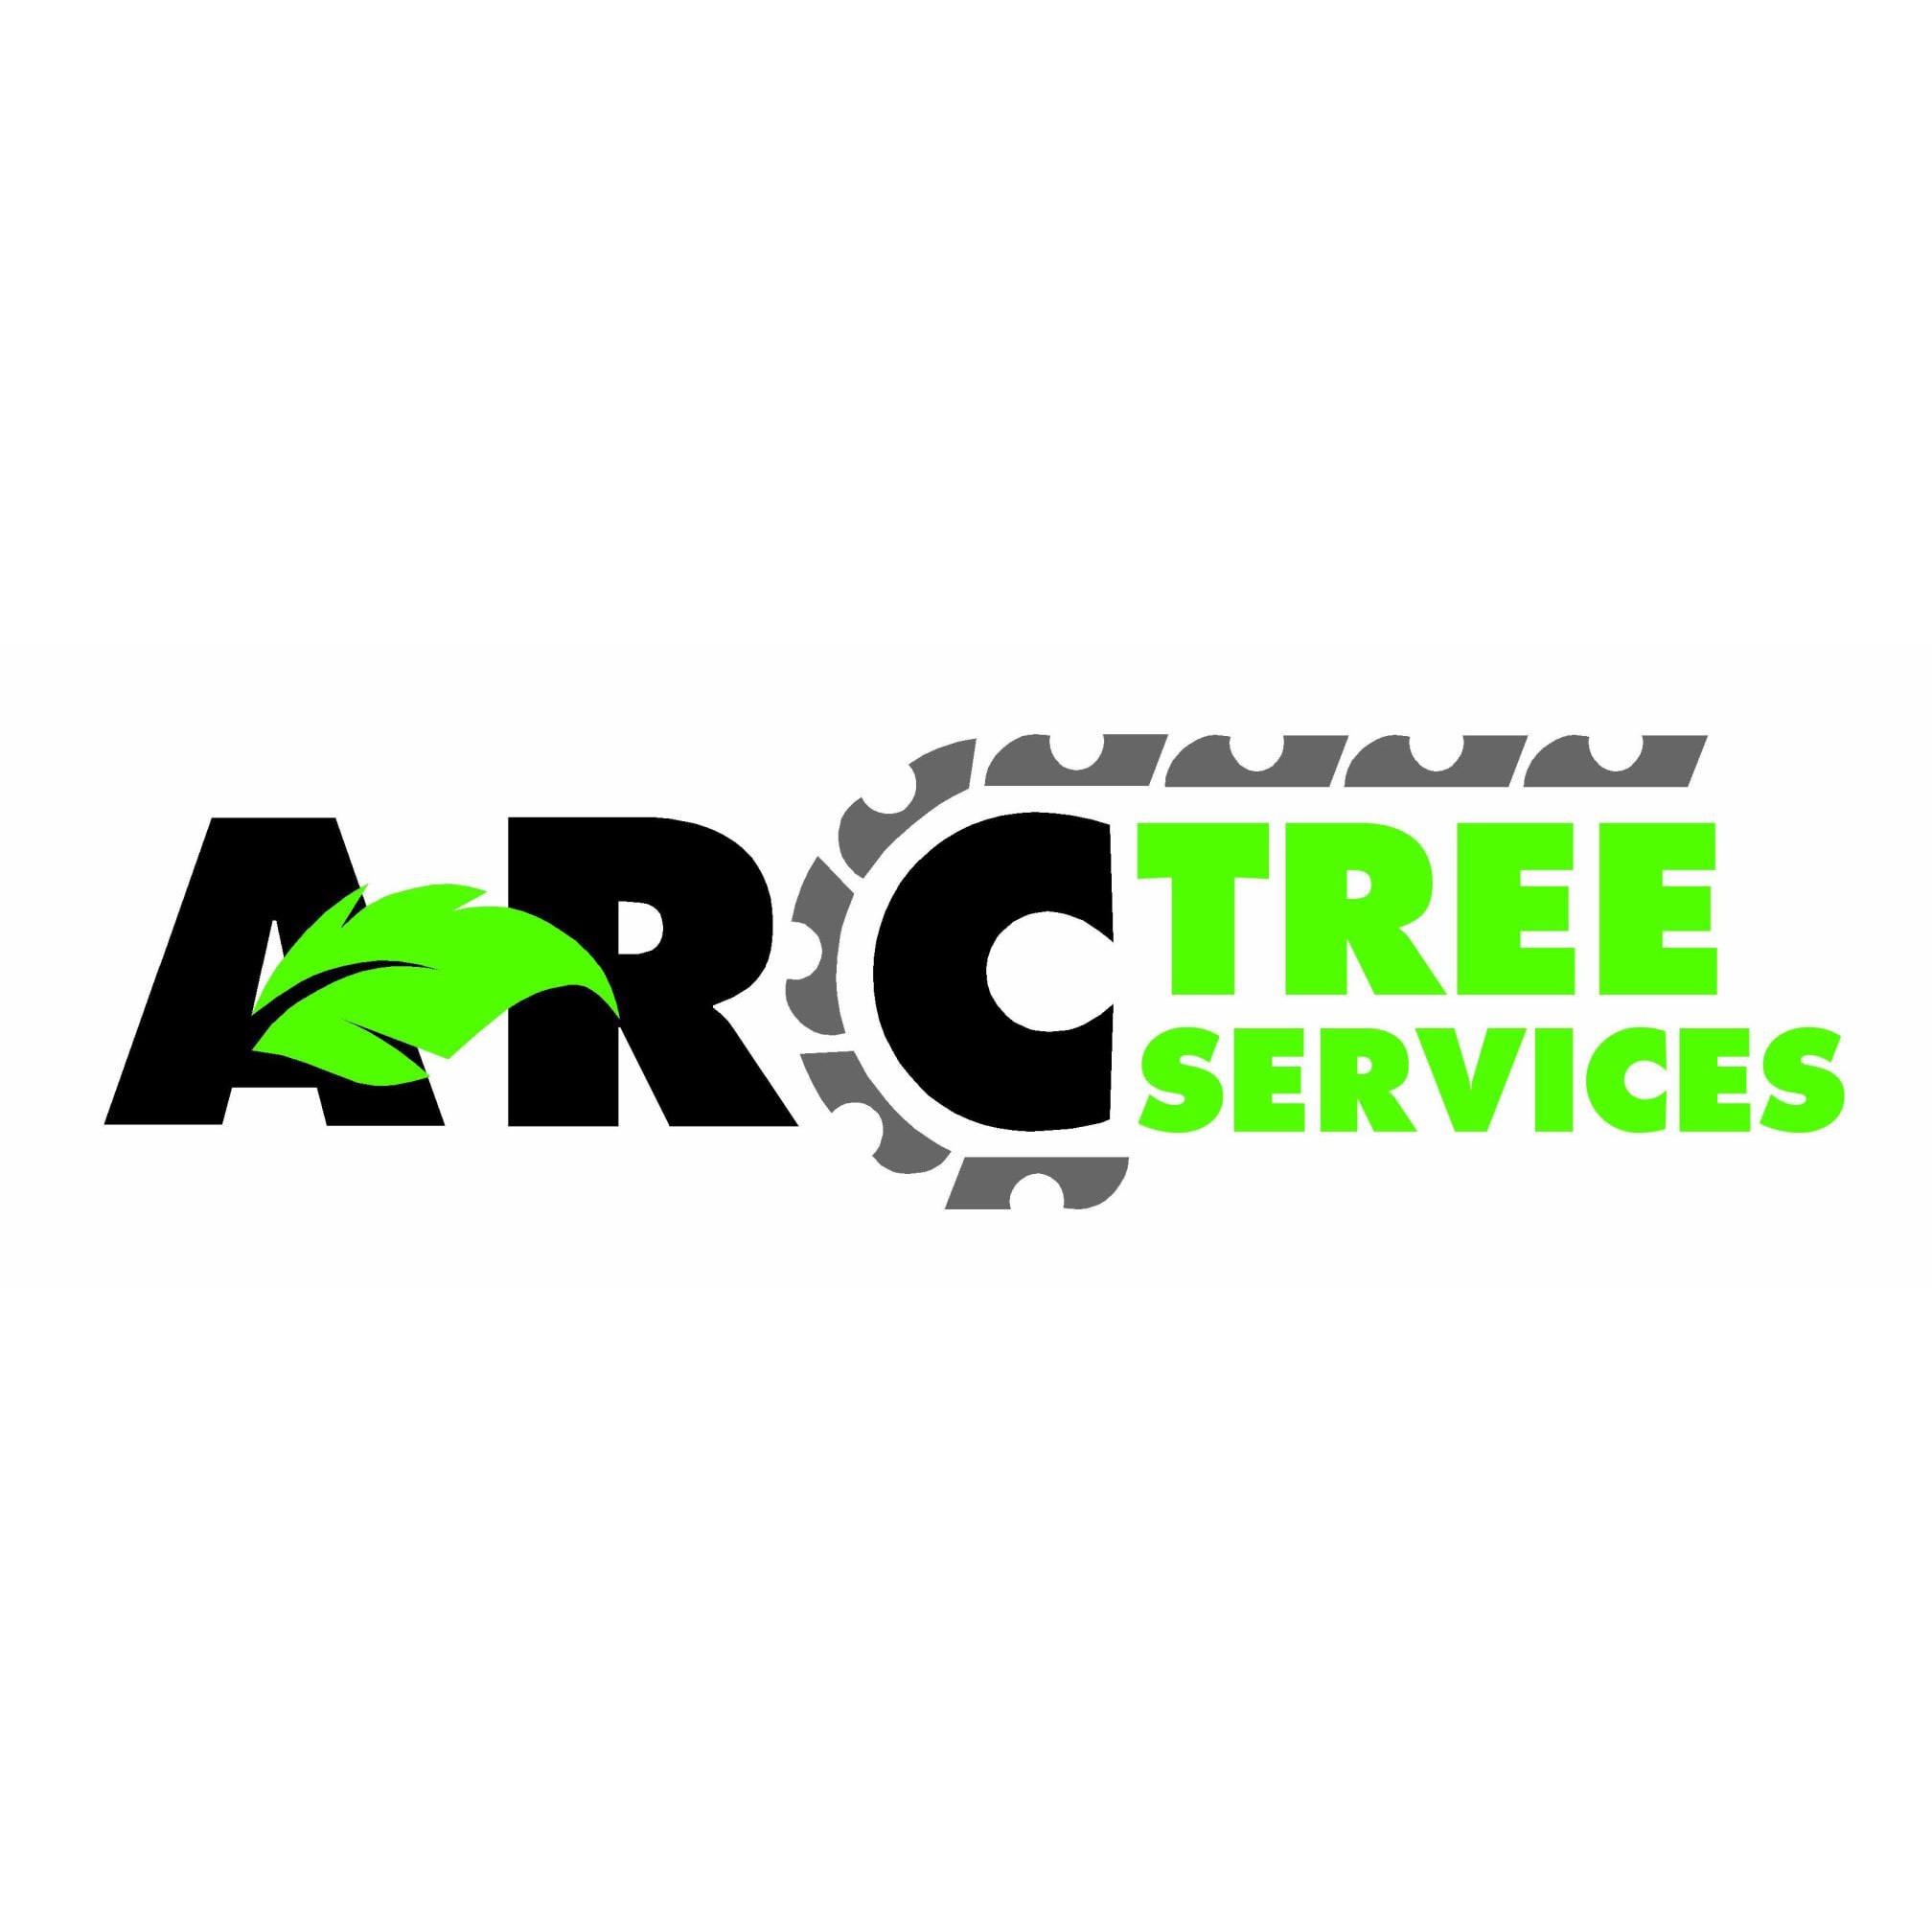 LOGO ARC Tree Services Dundee 07503 742424